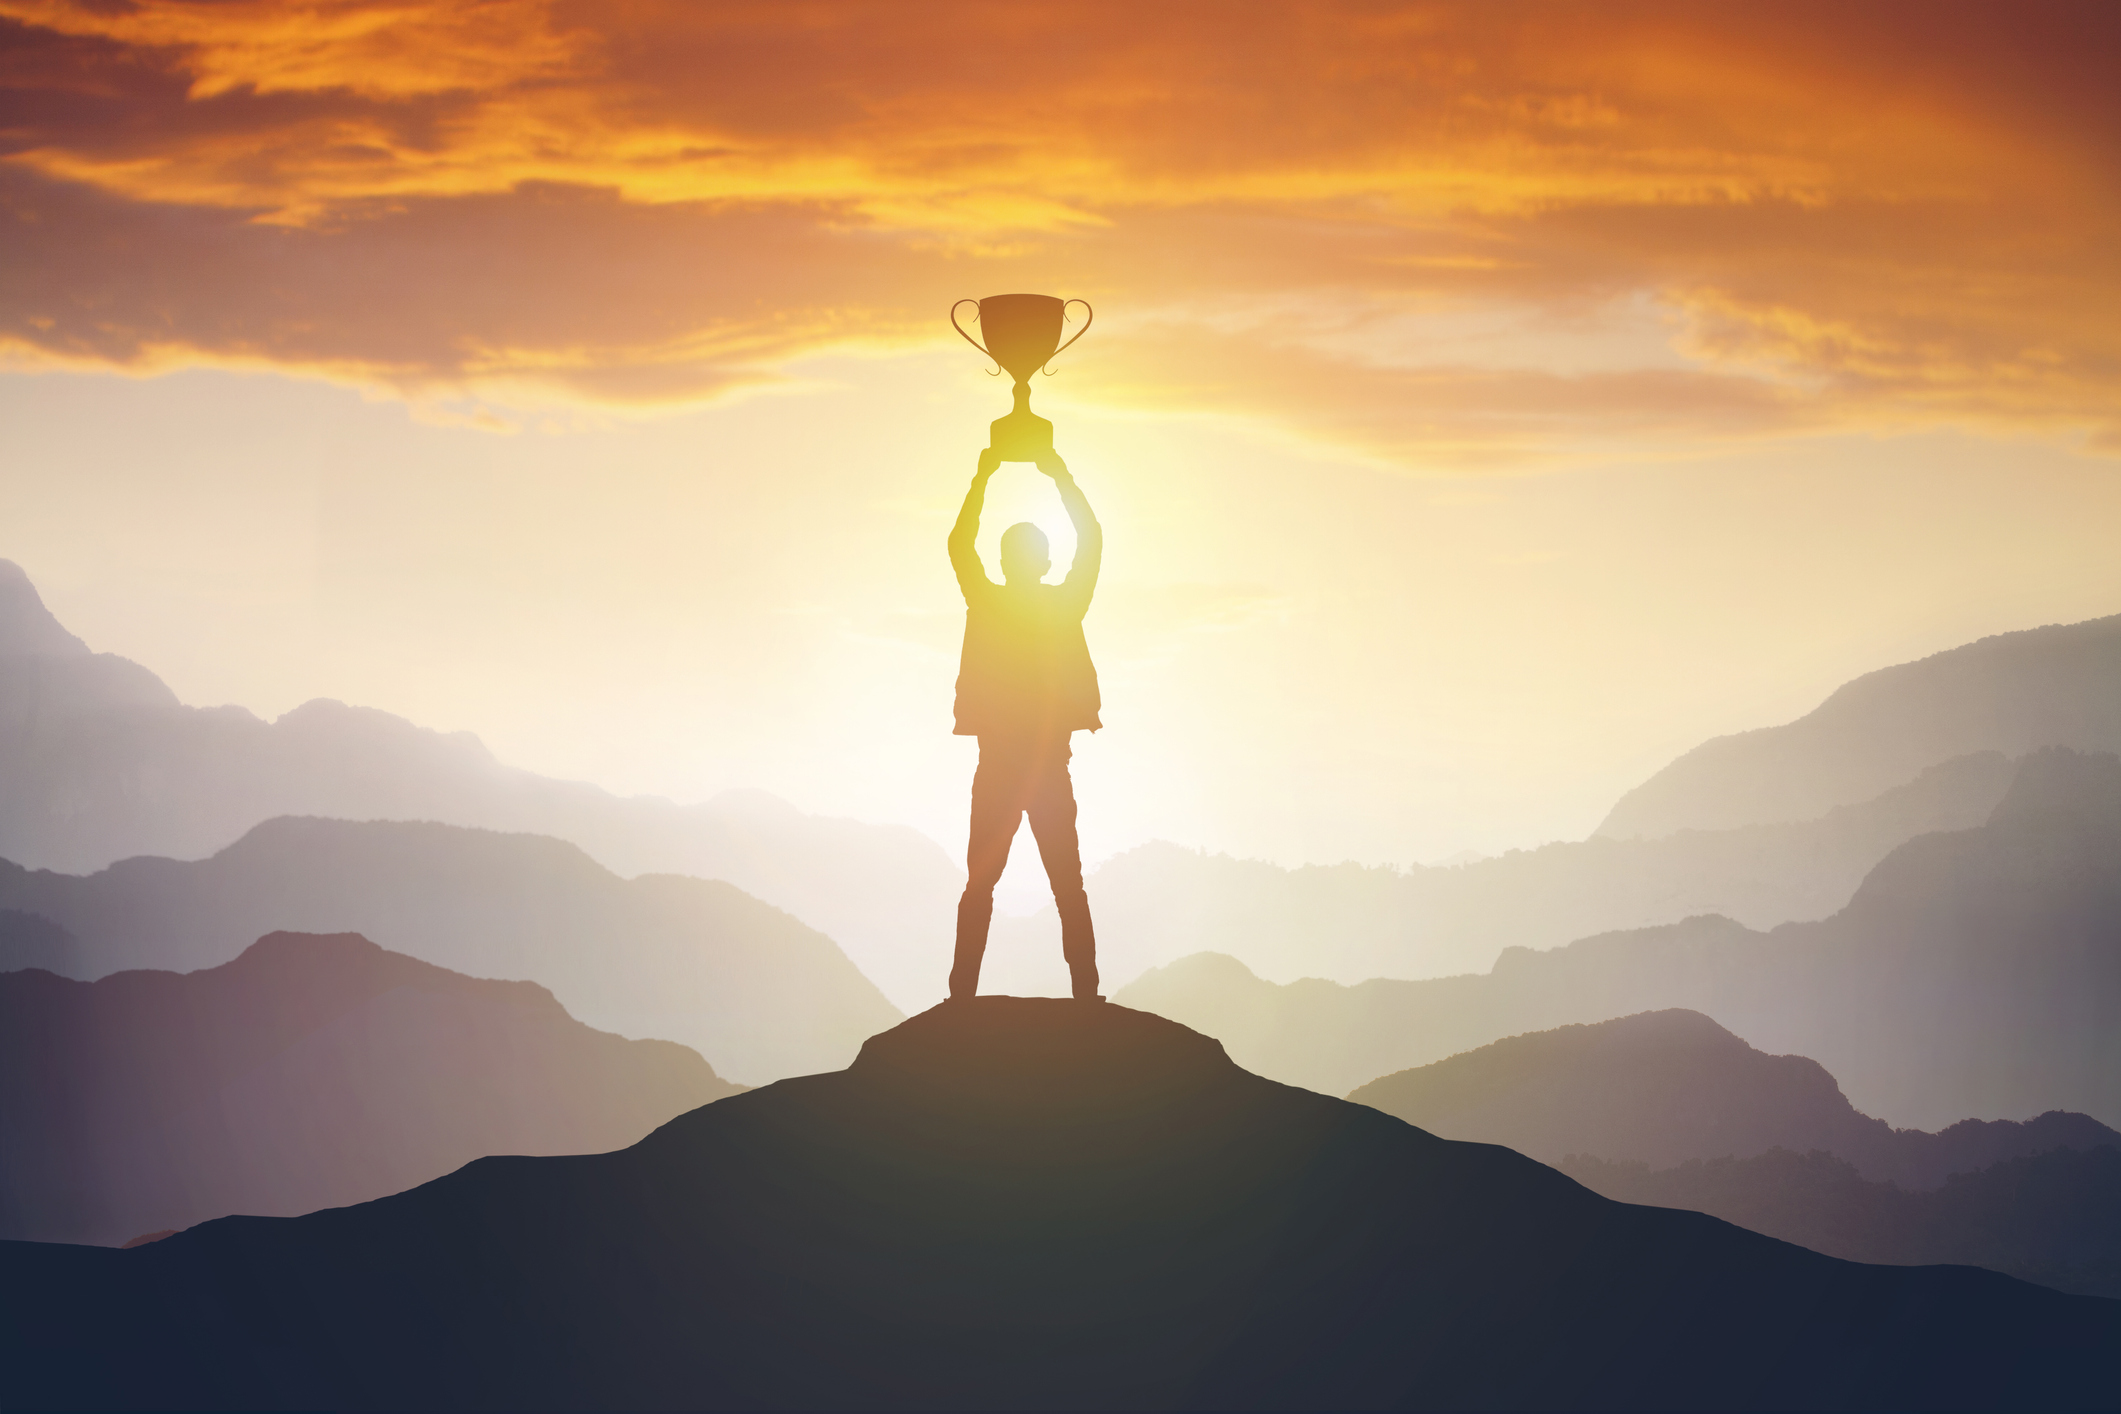 Stock Image of a Silhouette Of A Man Standing on A Mountain and Holding A Trophy Above His Head